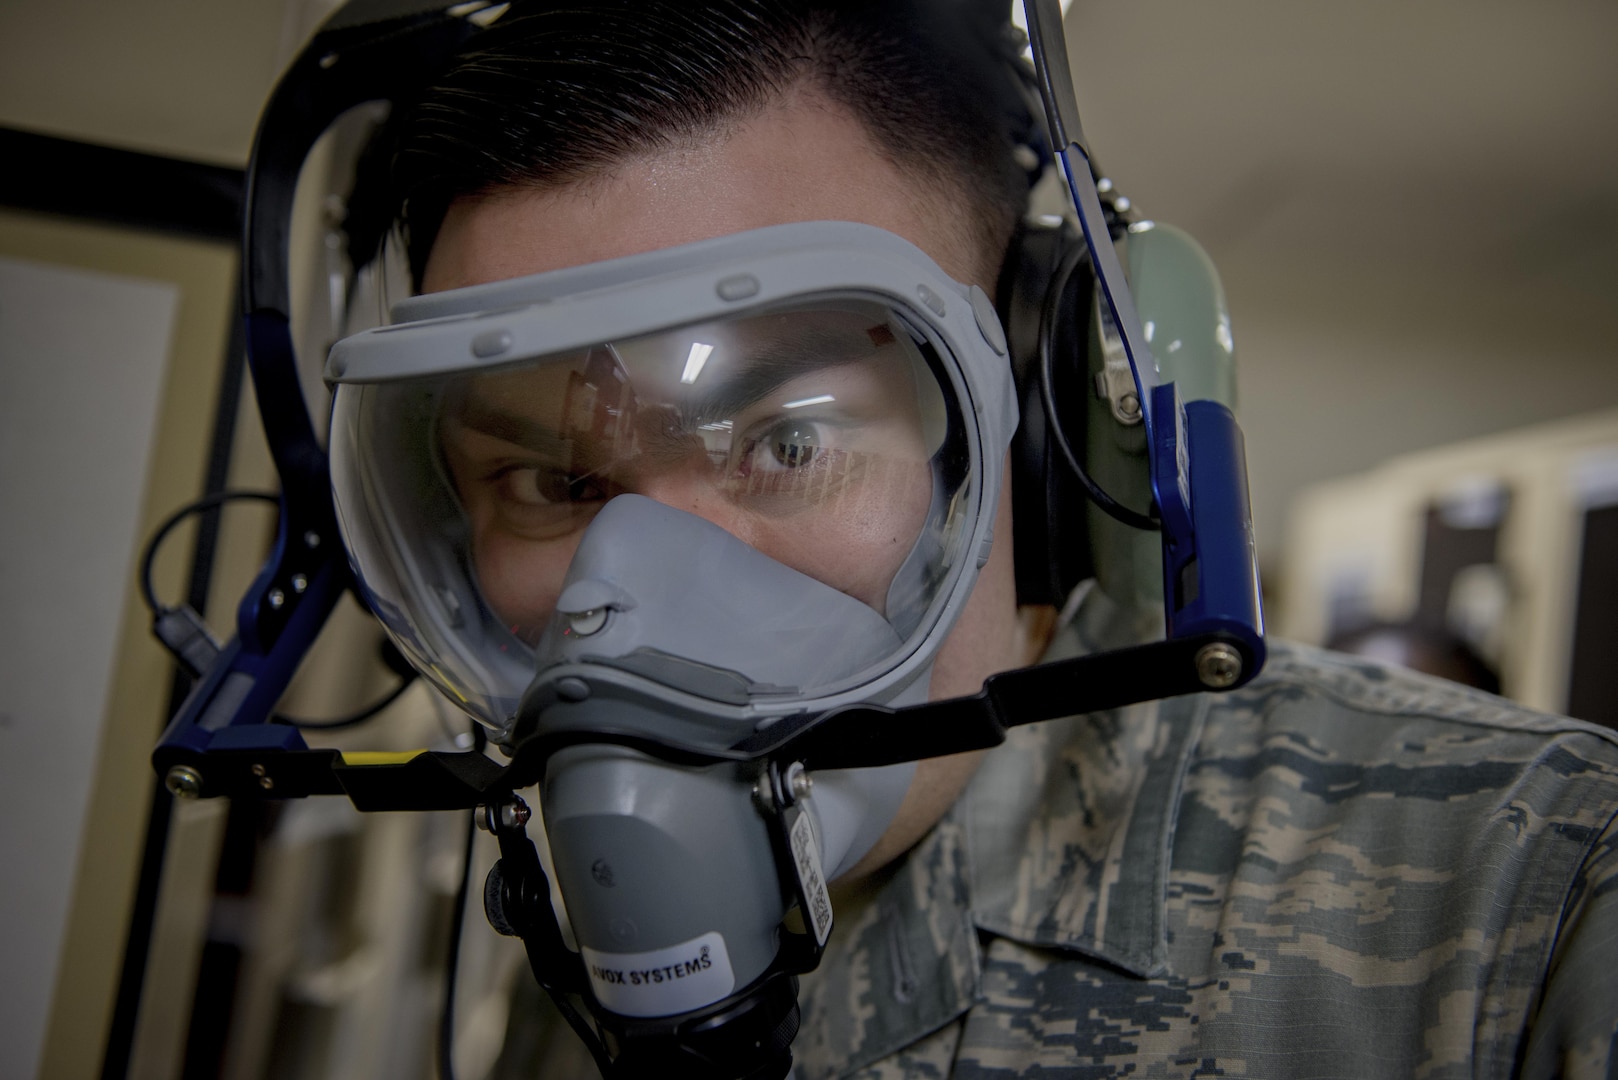 Senior Airman Kenny Batallas, 374th Operations Support Squadron Aircrew Flight Equipment flight technician, performs an operations check on a new quick-dawn oxygen mask Jan. 25, 2017, at Yokota Air Base, Japan. Operations checks are performed by the 374th AFE flight regularly on every piece of aircrew life-support and survival item to ensure everything functions as required. (U.S. Air Force photo by Airman 1st Class Donald Hudson)